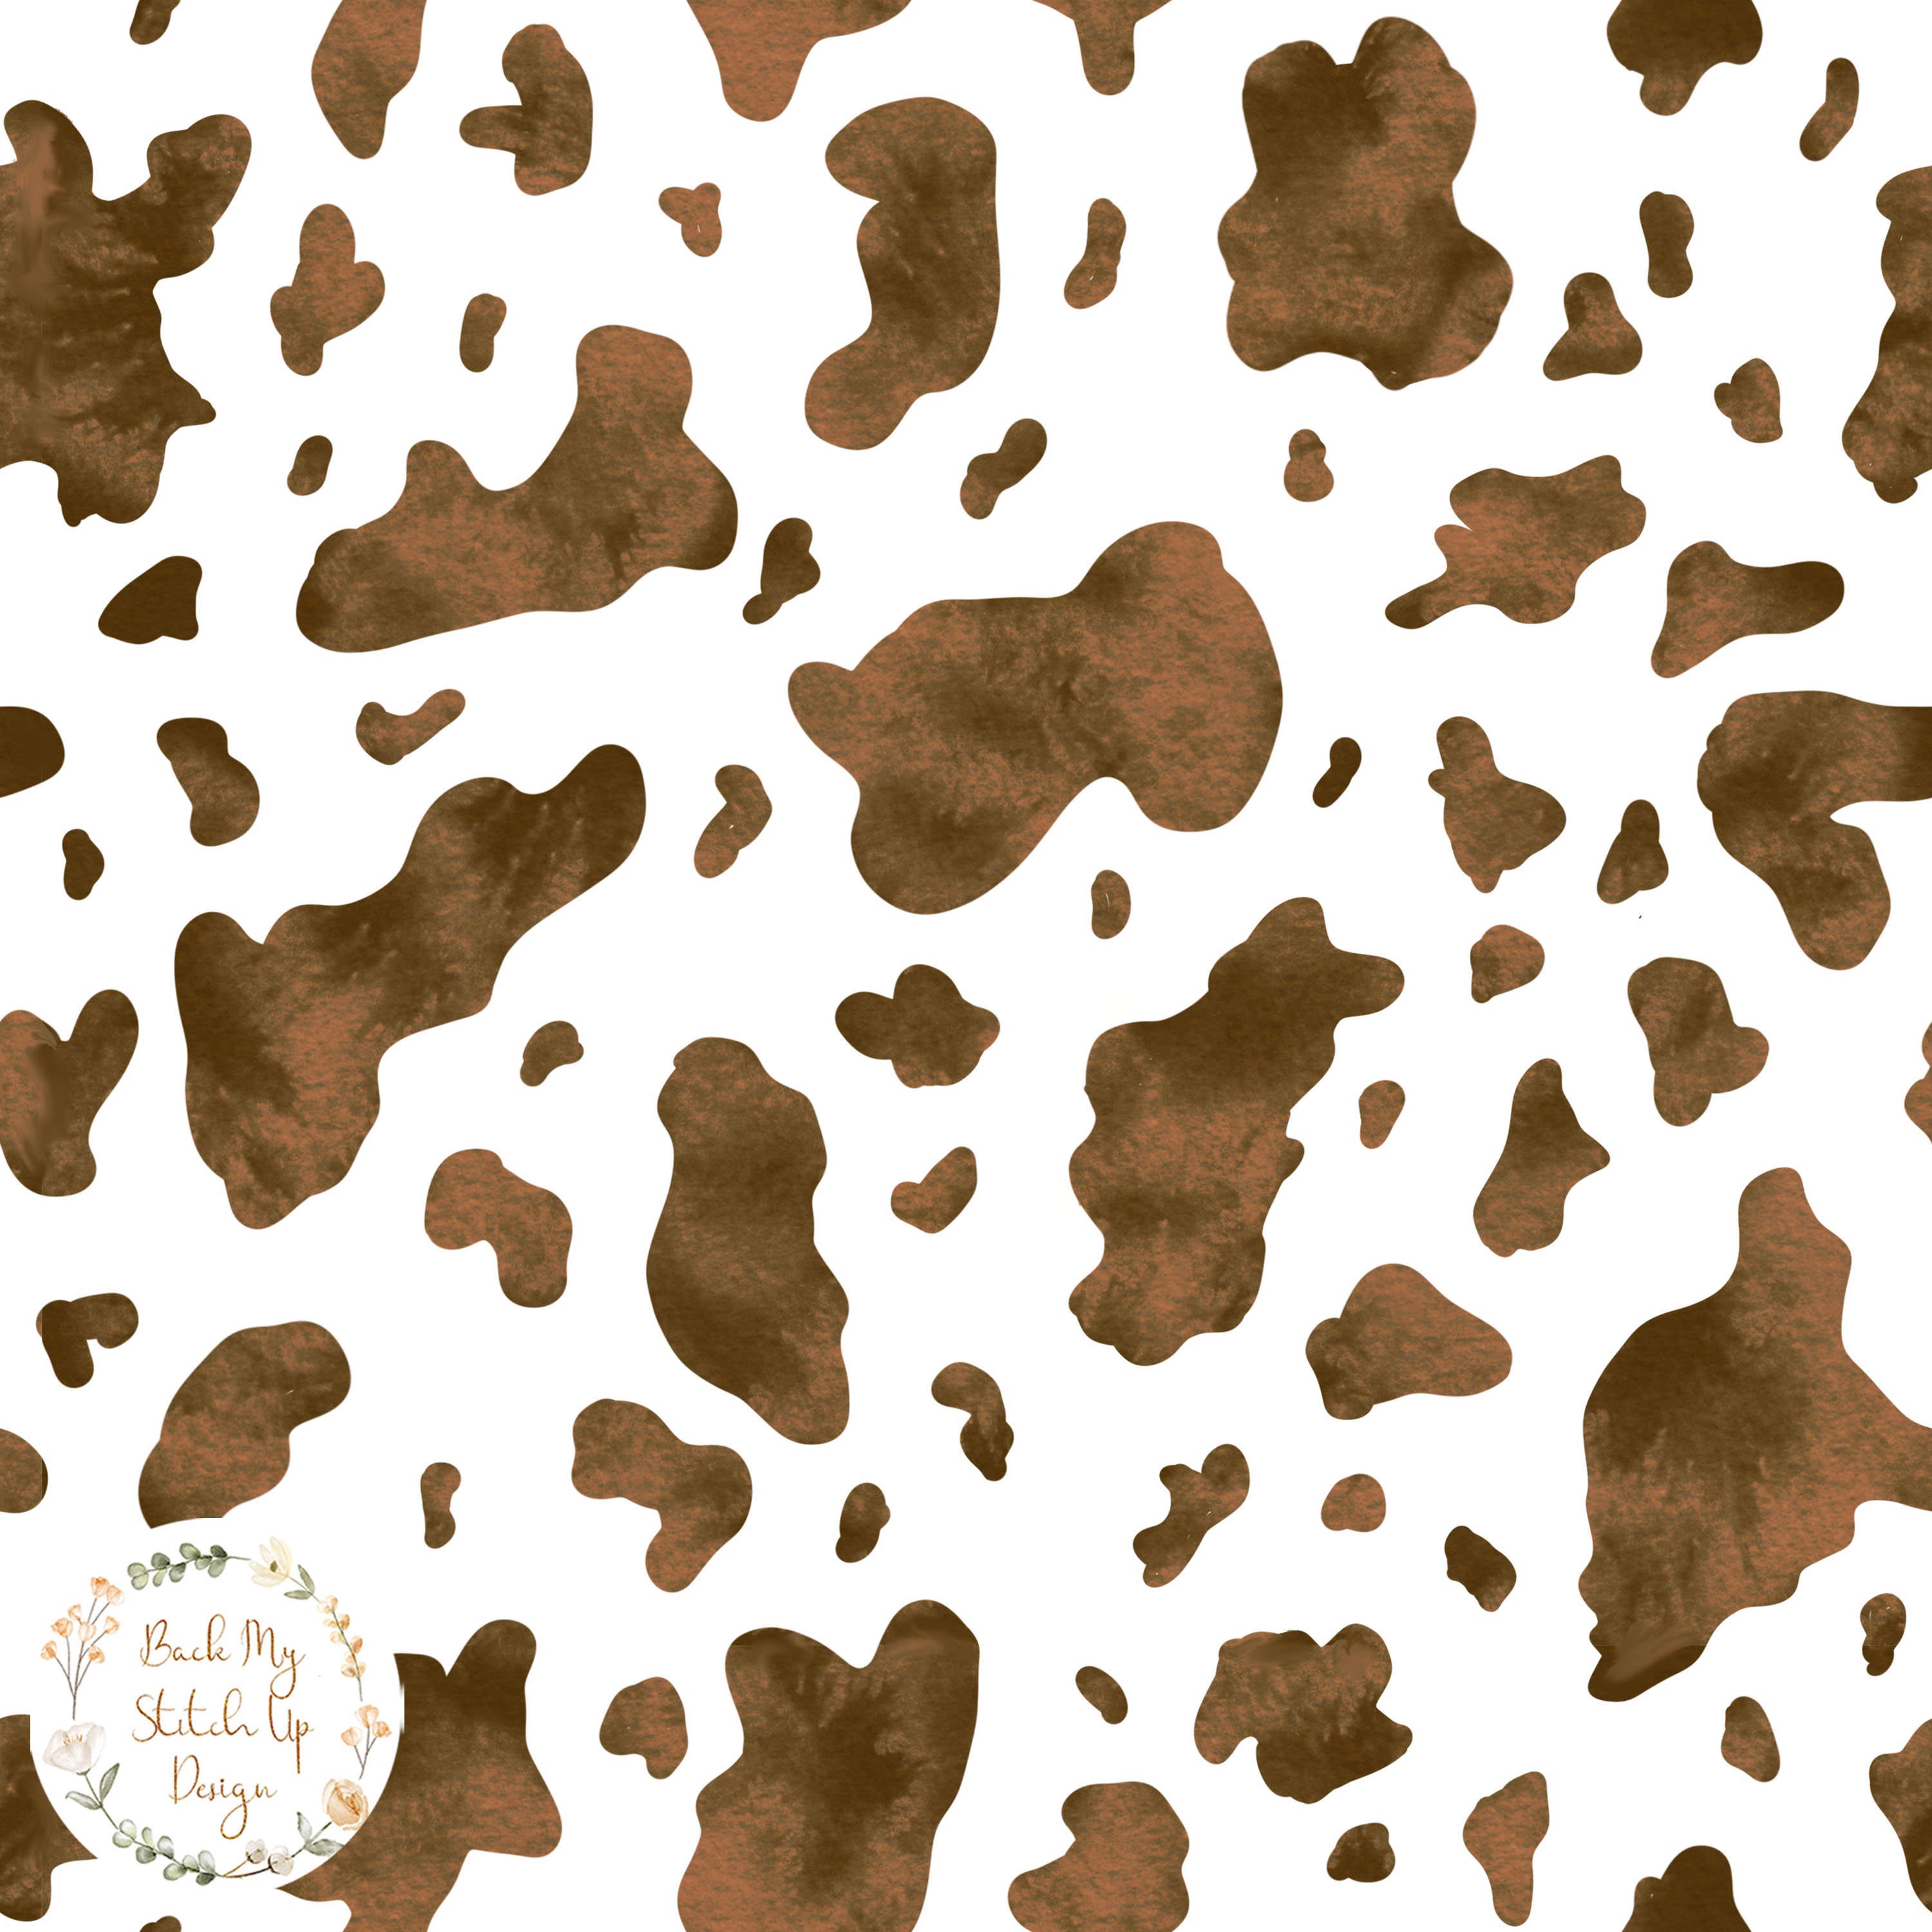 Cow Print BROWN Seamless Pattern, Animal Print fabric design, Watercolour,  Digital Download, Commercial Licence, Non-Exclusive